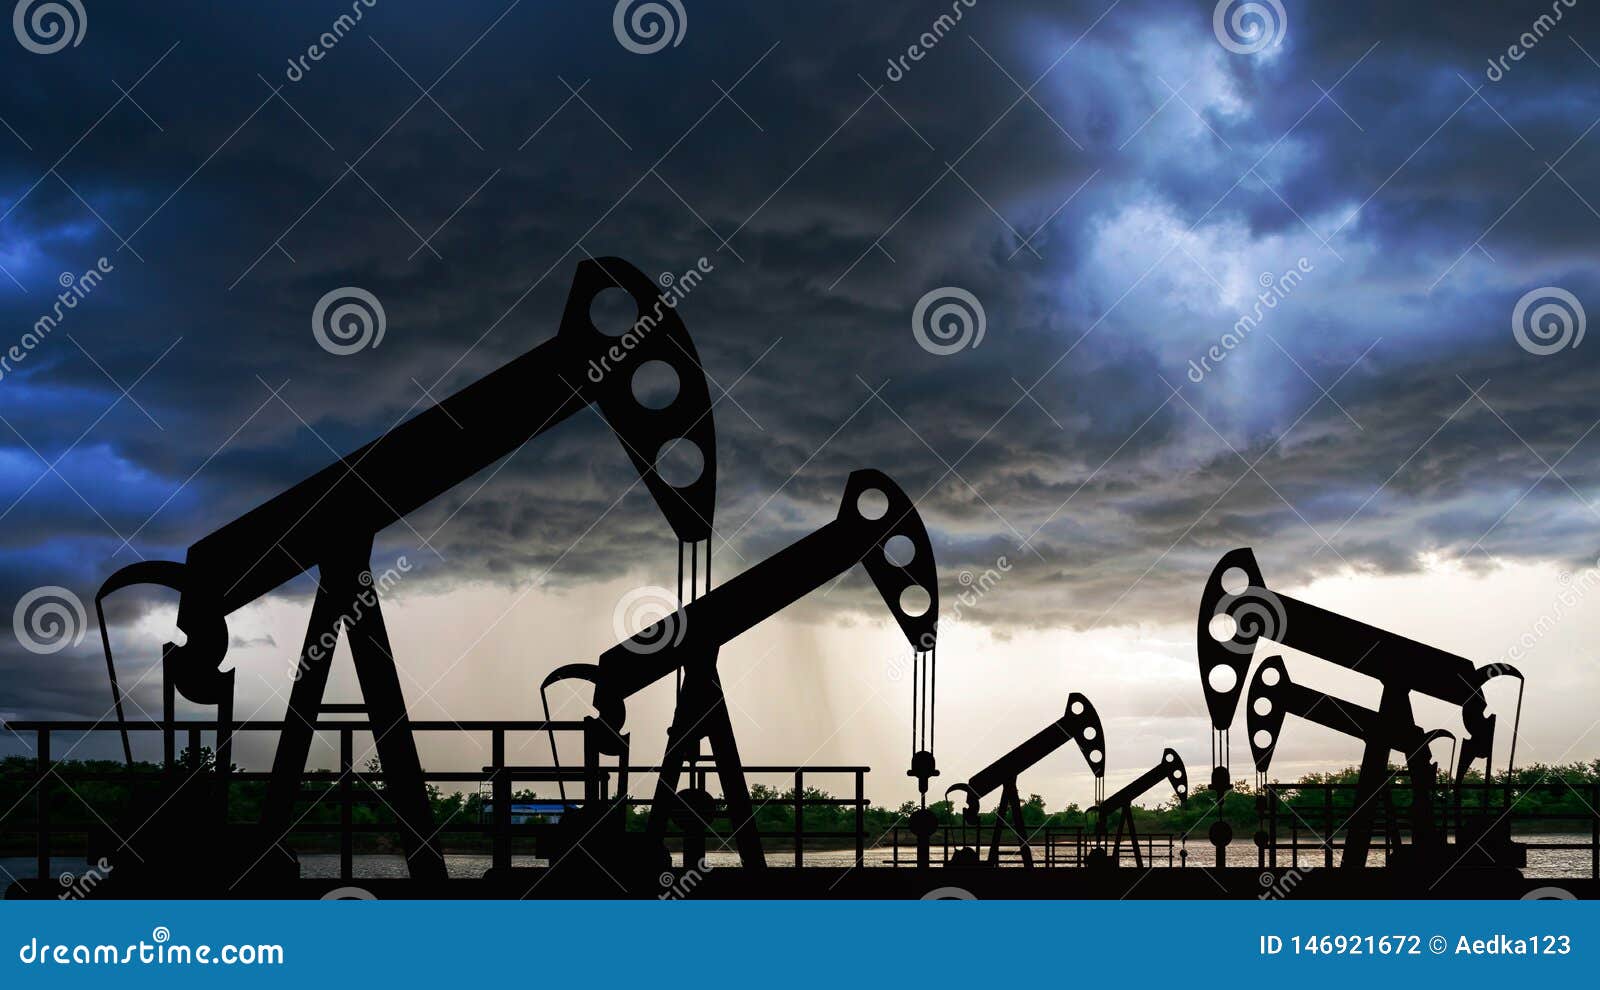 Oil Pump Oil Rig Energy Industrial Machine for Petroleum in the